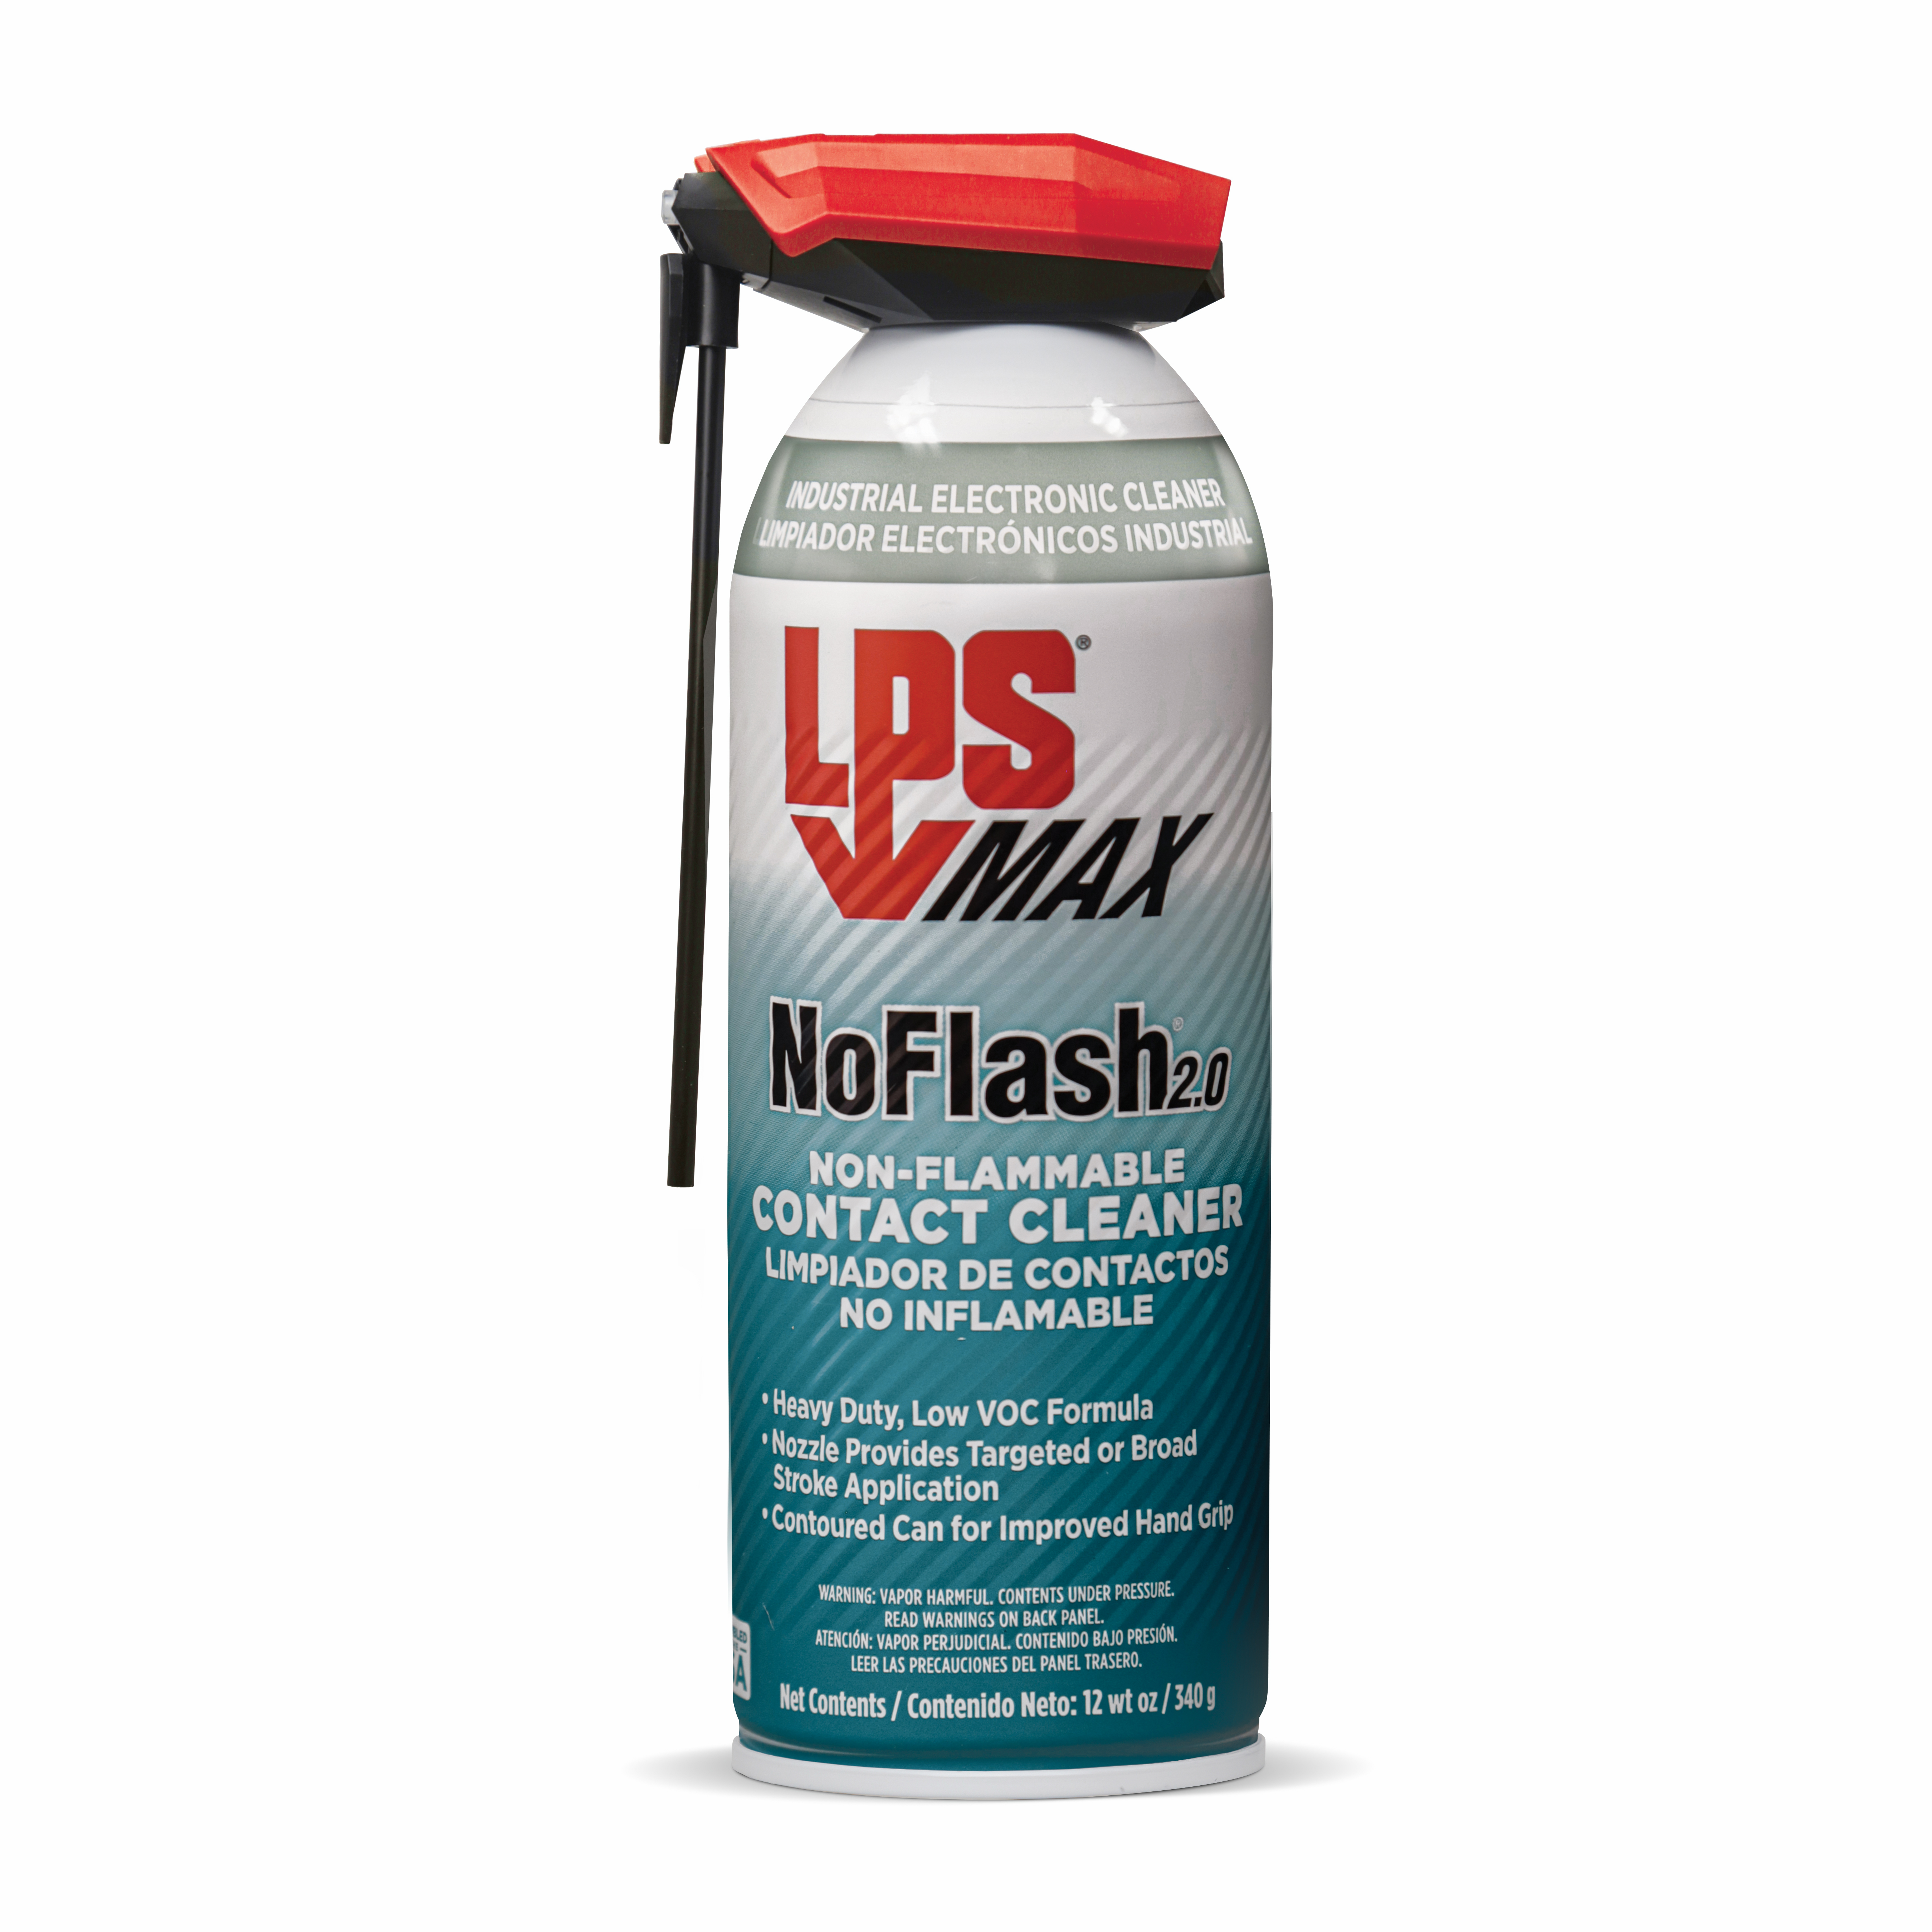 12 OZ LPS MAX NOFLASH 2.0 NON-FLAM CONTACT CLEANER